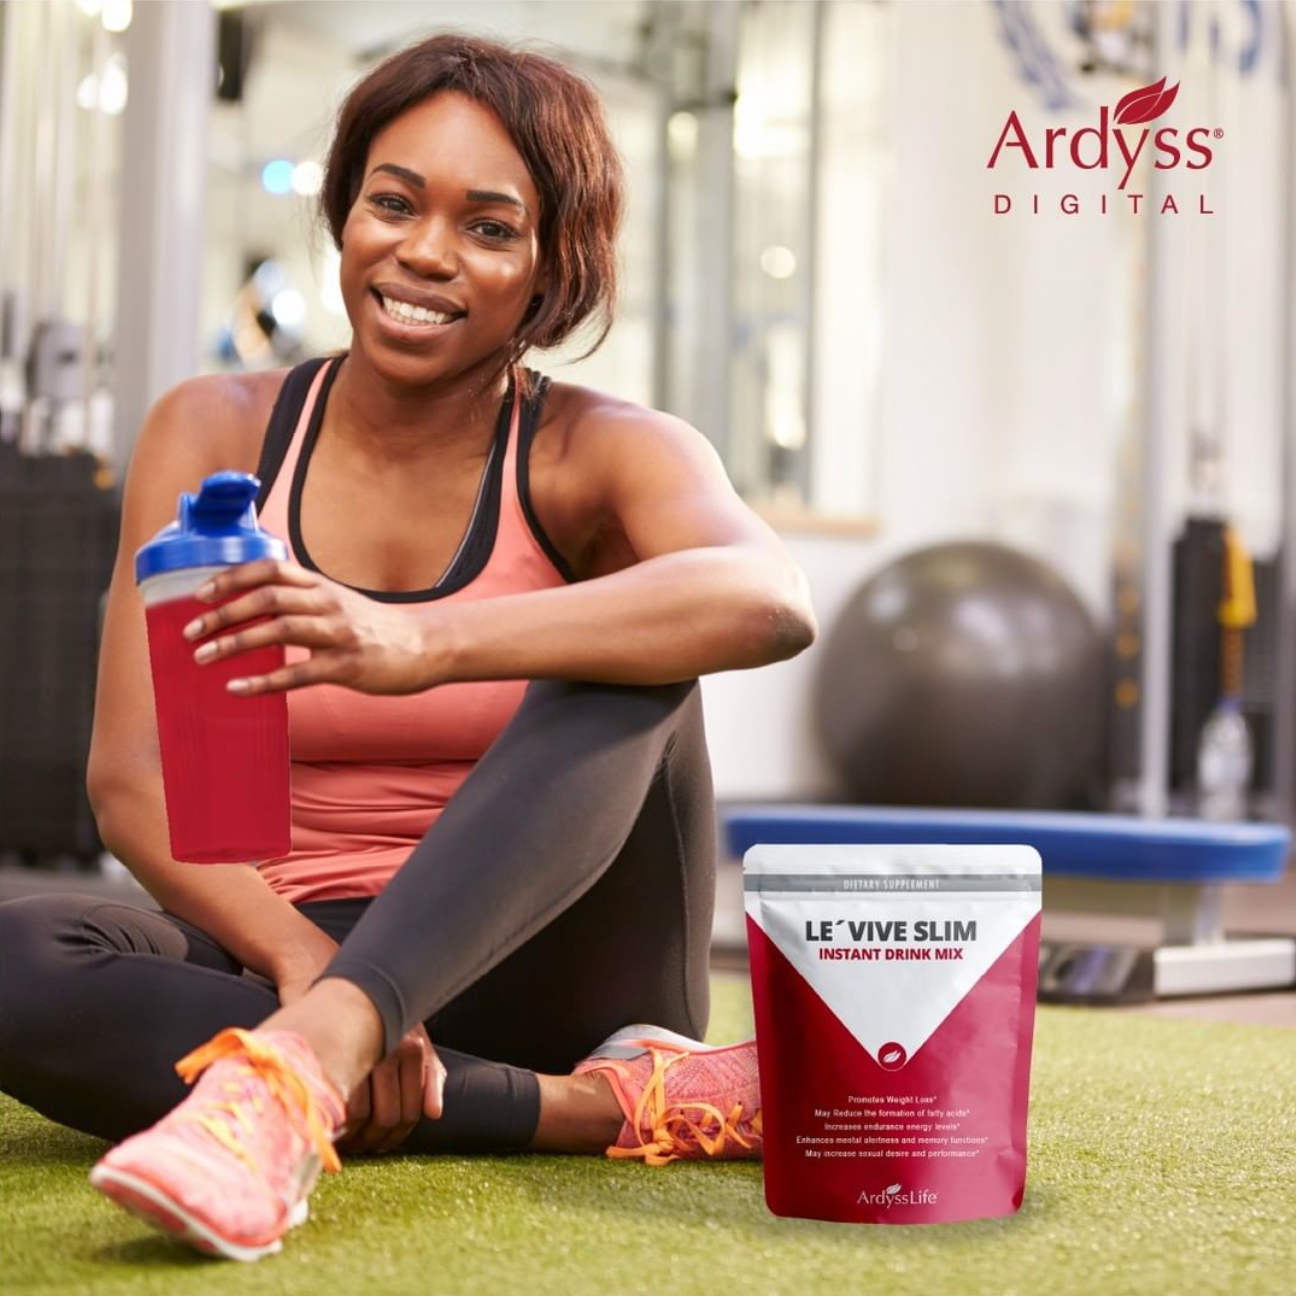 The Reshaping and Nutritional Company – Ardyss digital